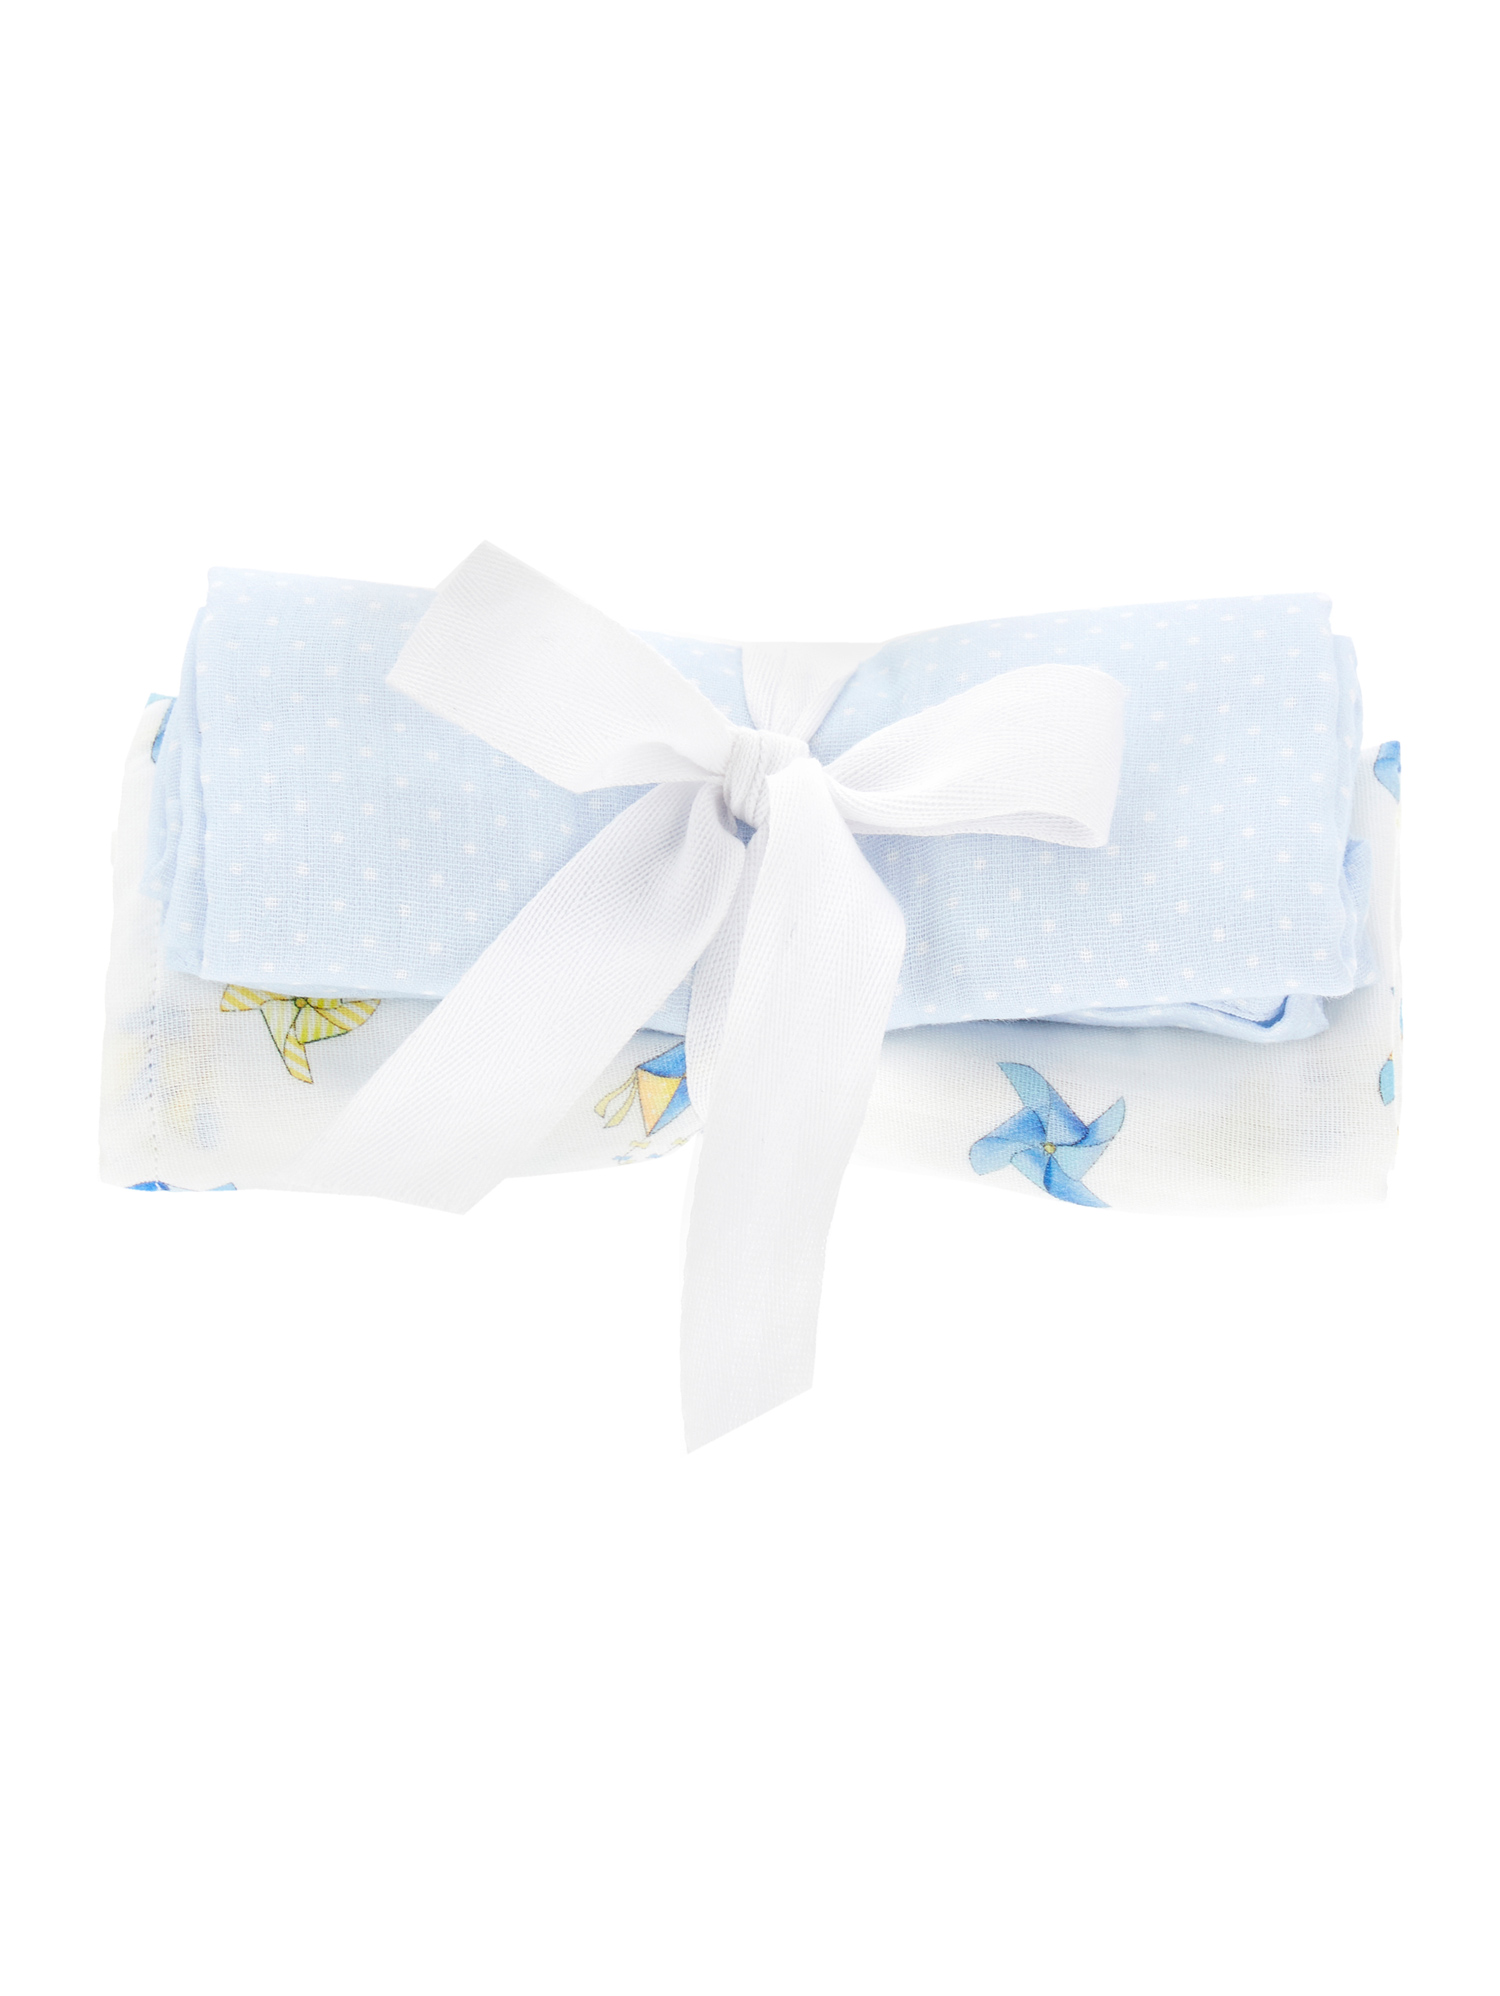 Monnalisa Pair Of Cotton Towels In White + Cloud